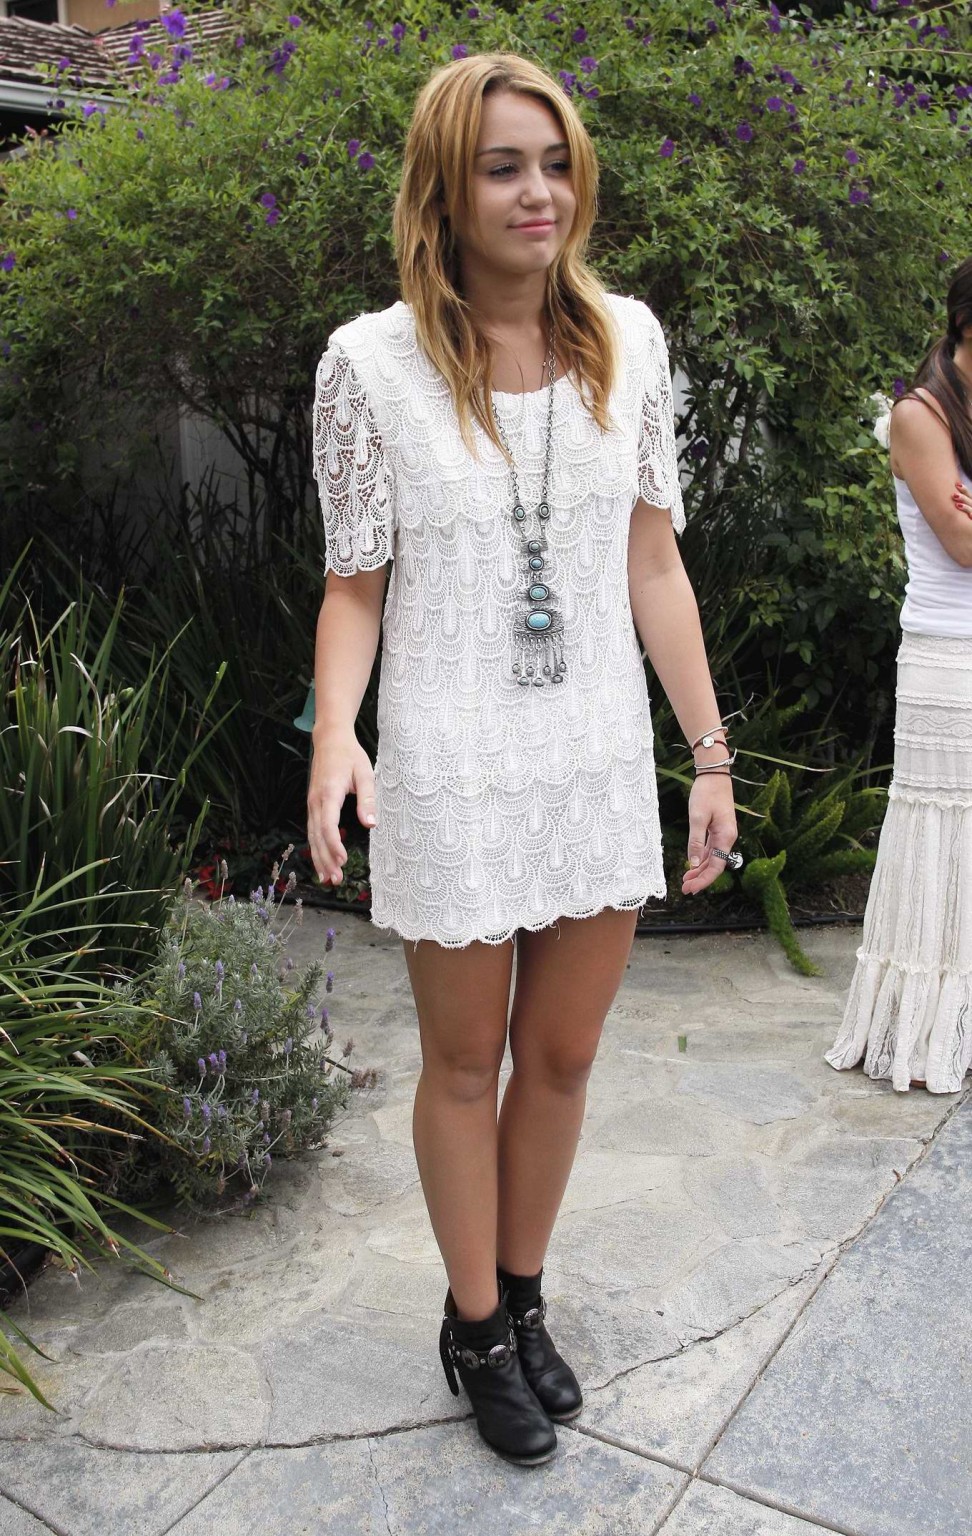 Miley Cyrus leggy wearing white mini dress at the house party #75289962